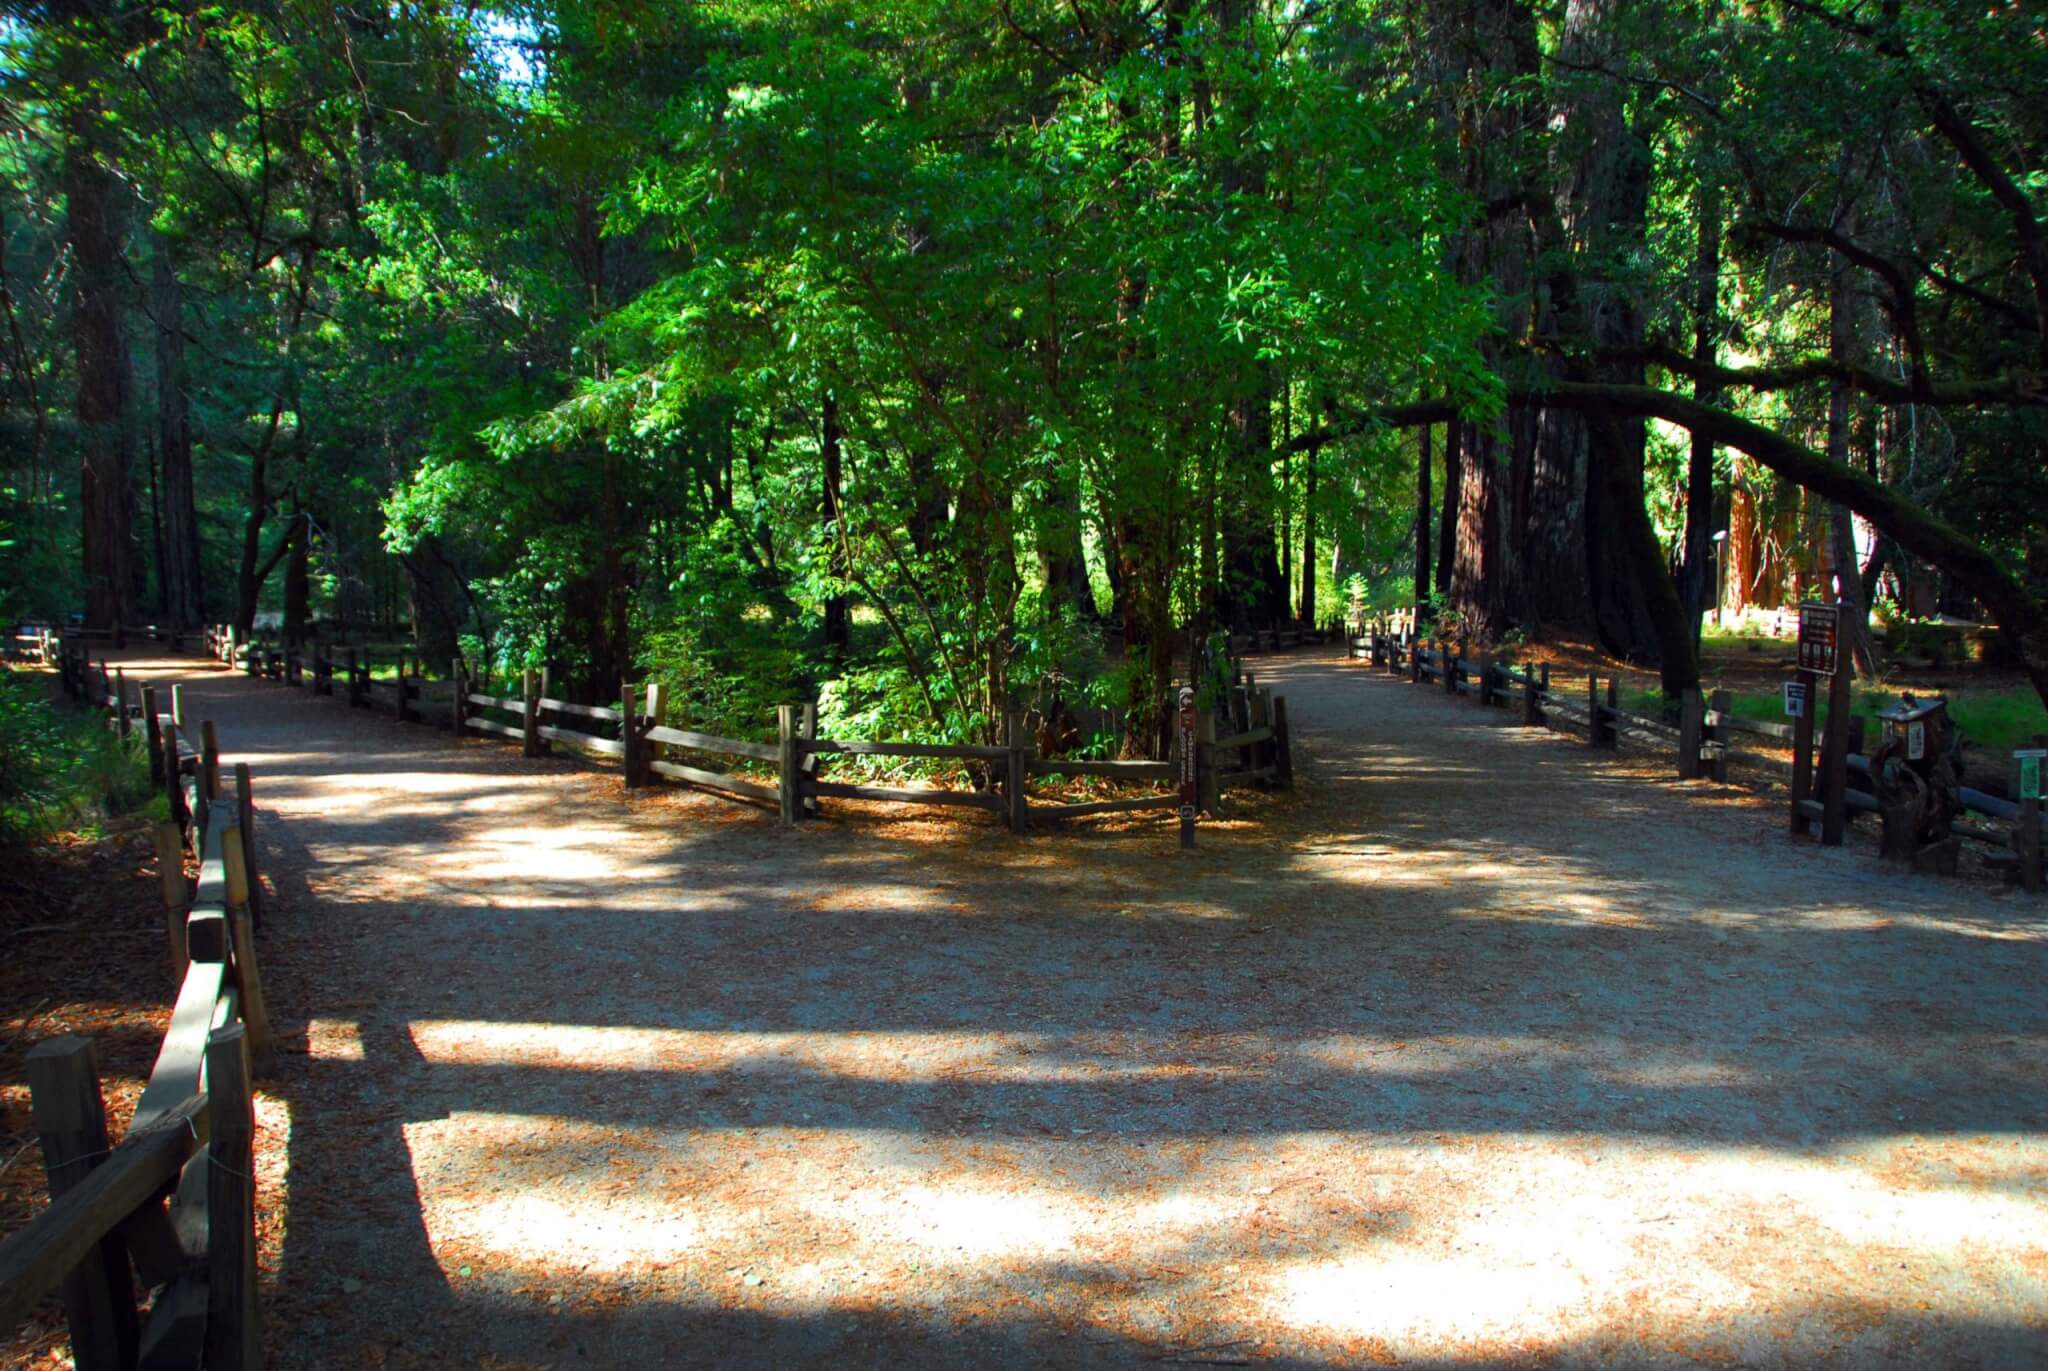 California Opens Campgrounds in 28 State Parks - Big Basin Redwoods State Park